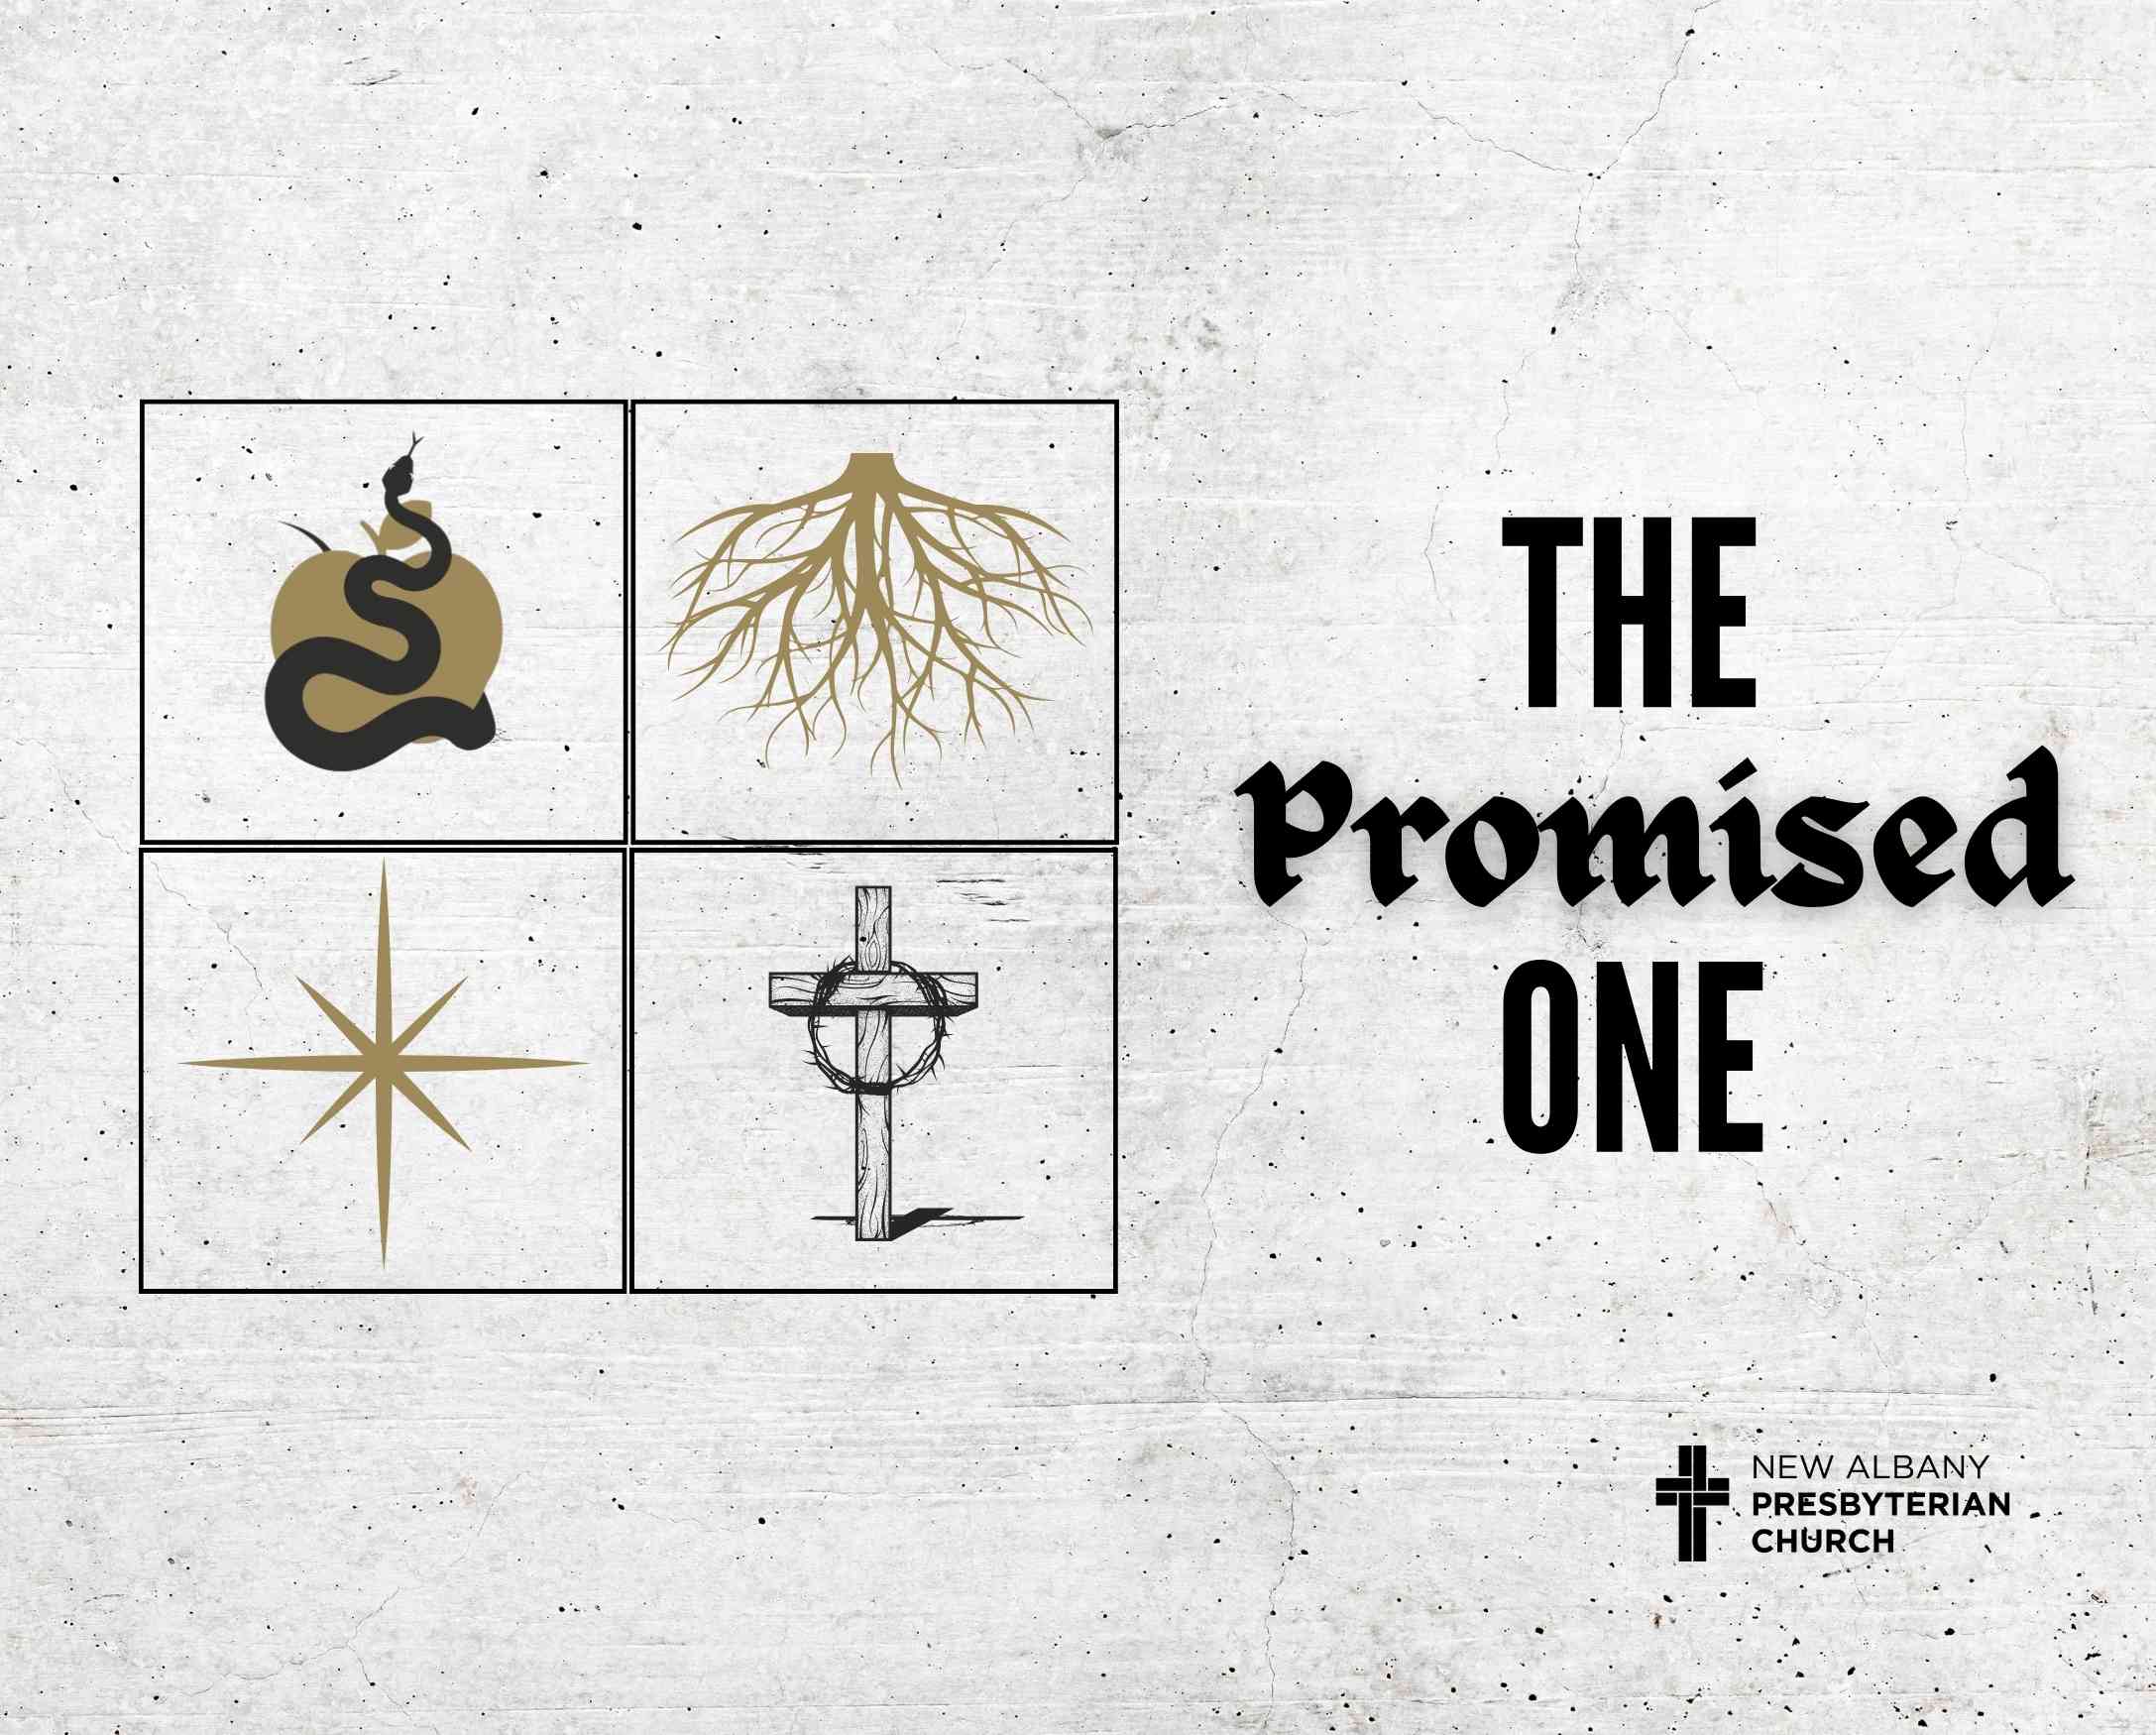 The Promised One: He Poured Out His Soul to Death